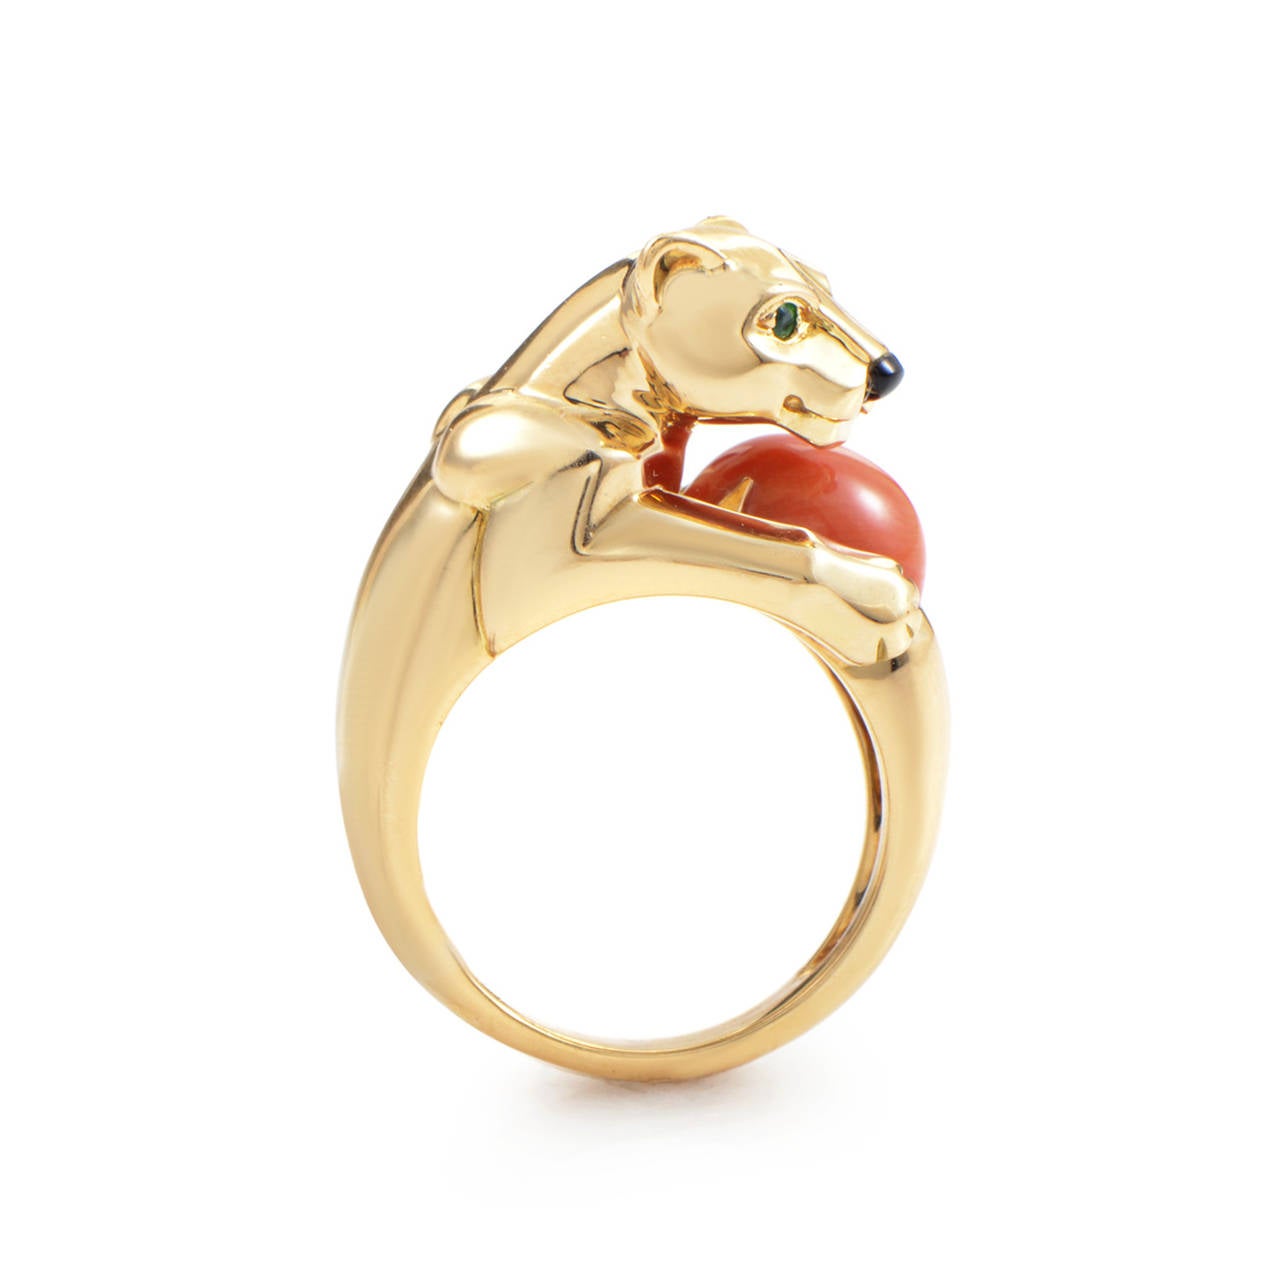 With an imaginative design and a wonderful combination of 18K yellow gold and precious gemstones, this Cartier Panthere ring is sure to please! The ring is made of 18K yellow gold and boasts a panther-shaped motif with green emerald eyes, an onyx